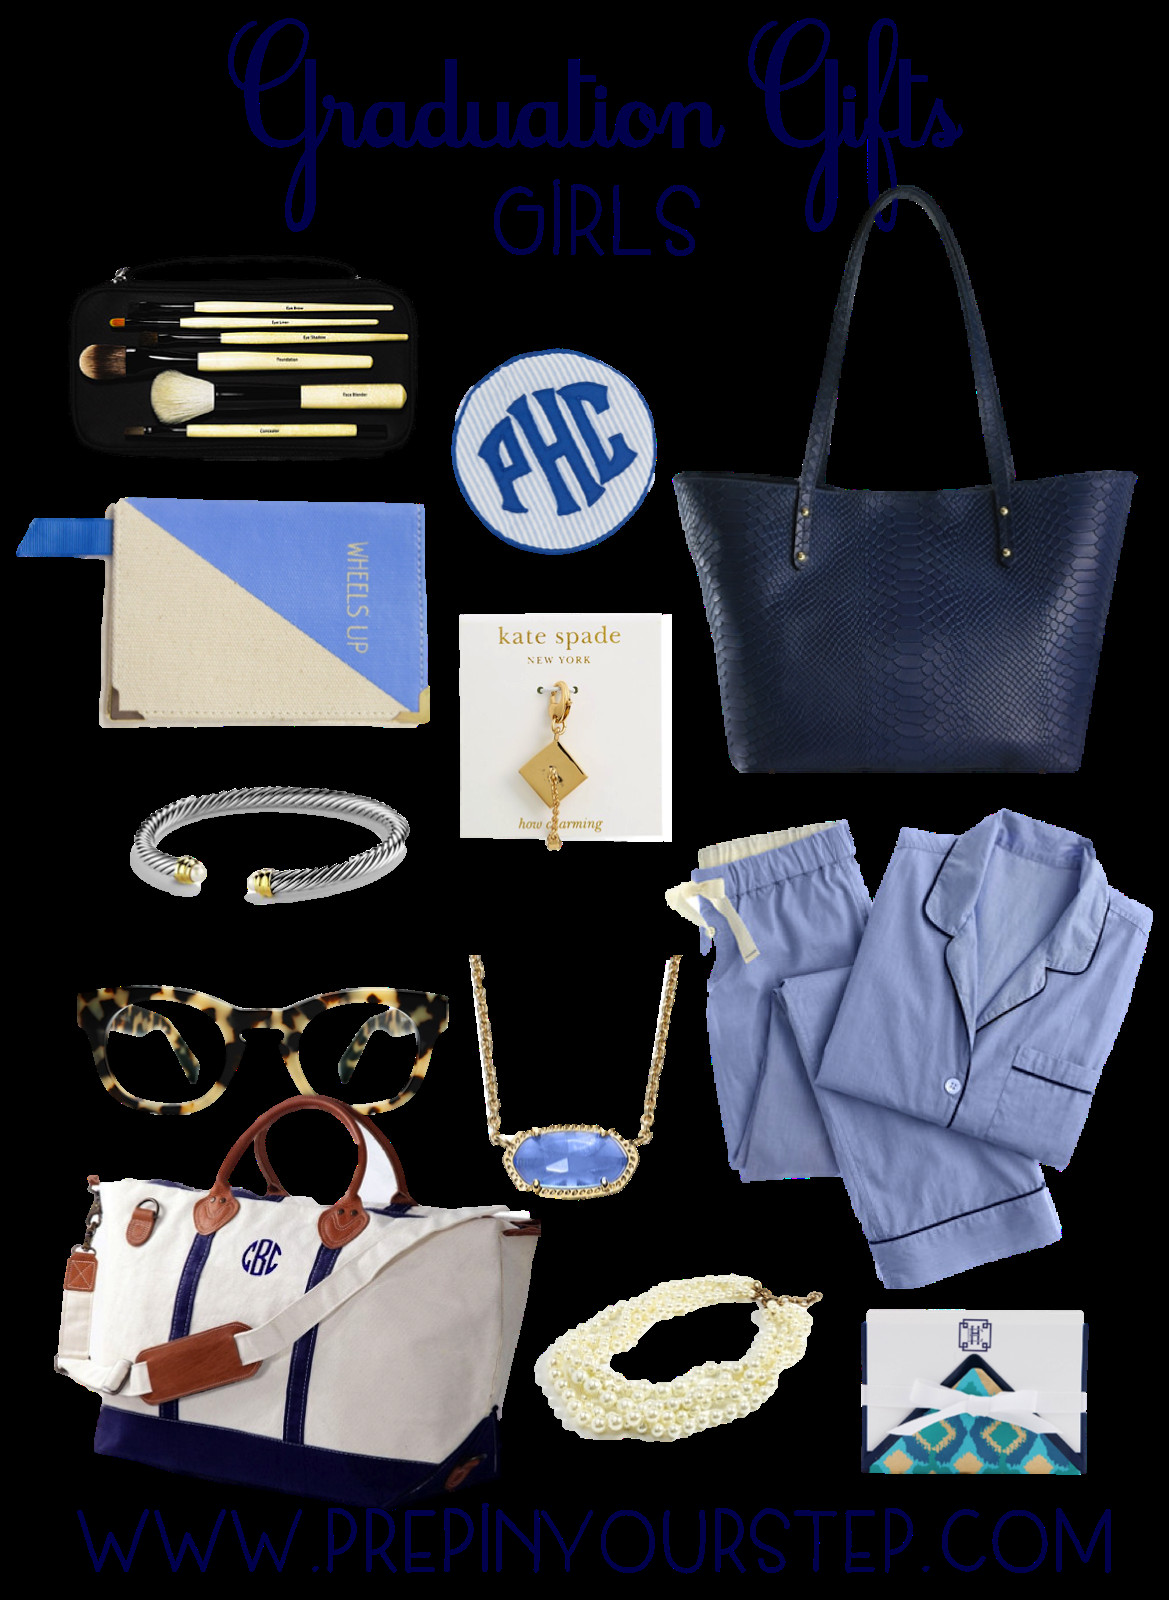 Graduation Gift Ideas For Girls
 Prep In Your Step Graduation Gift Ideas Guys & Girls